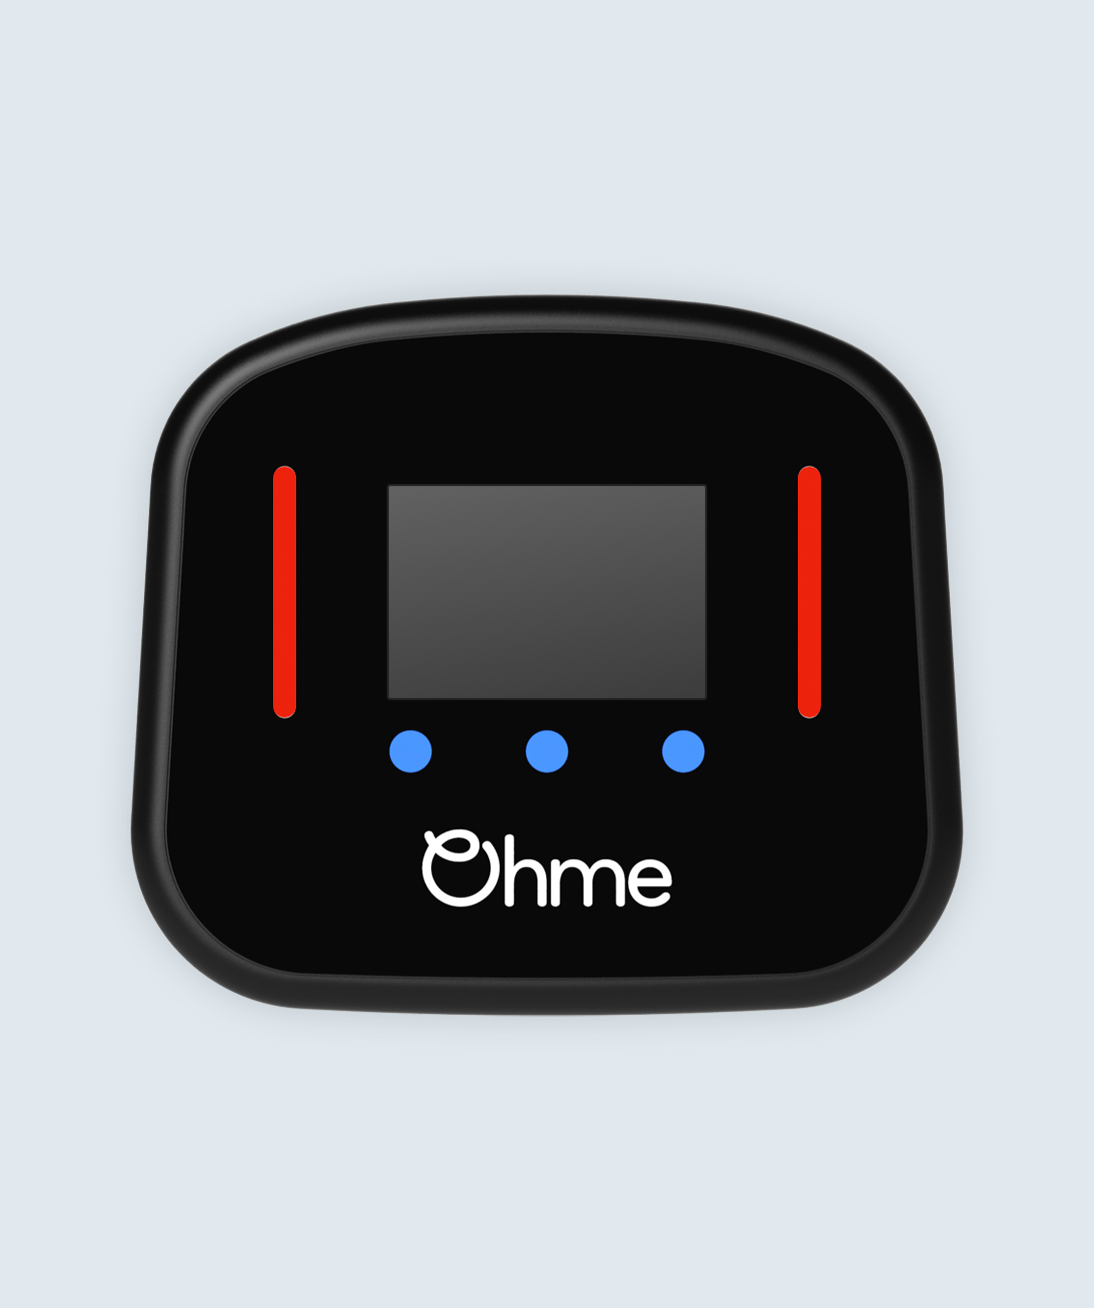 Ohme home pro with red lights illuminated